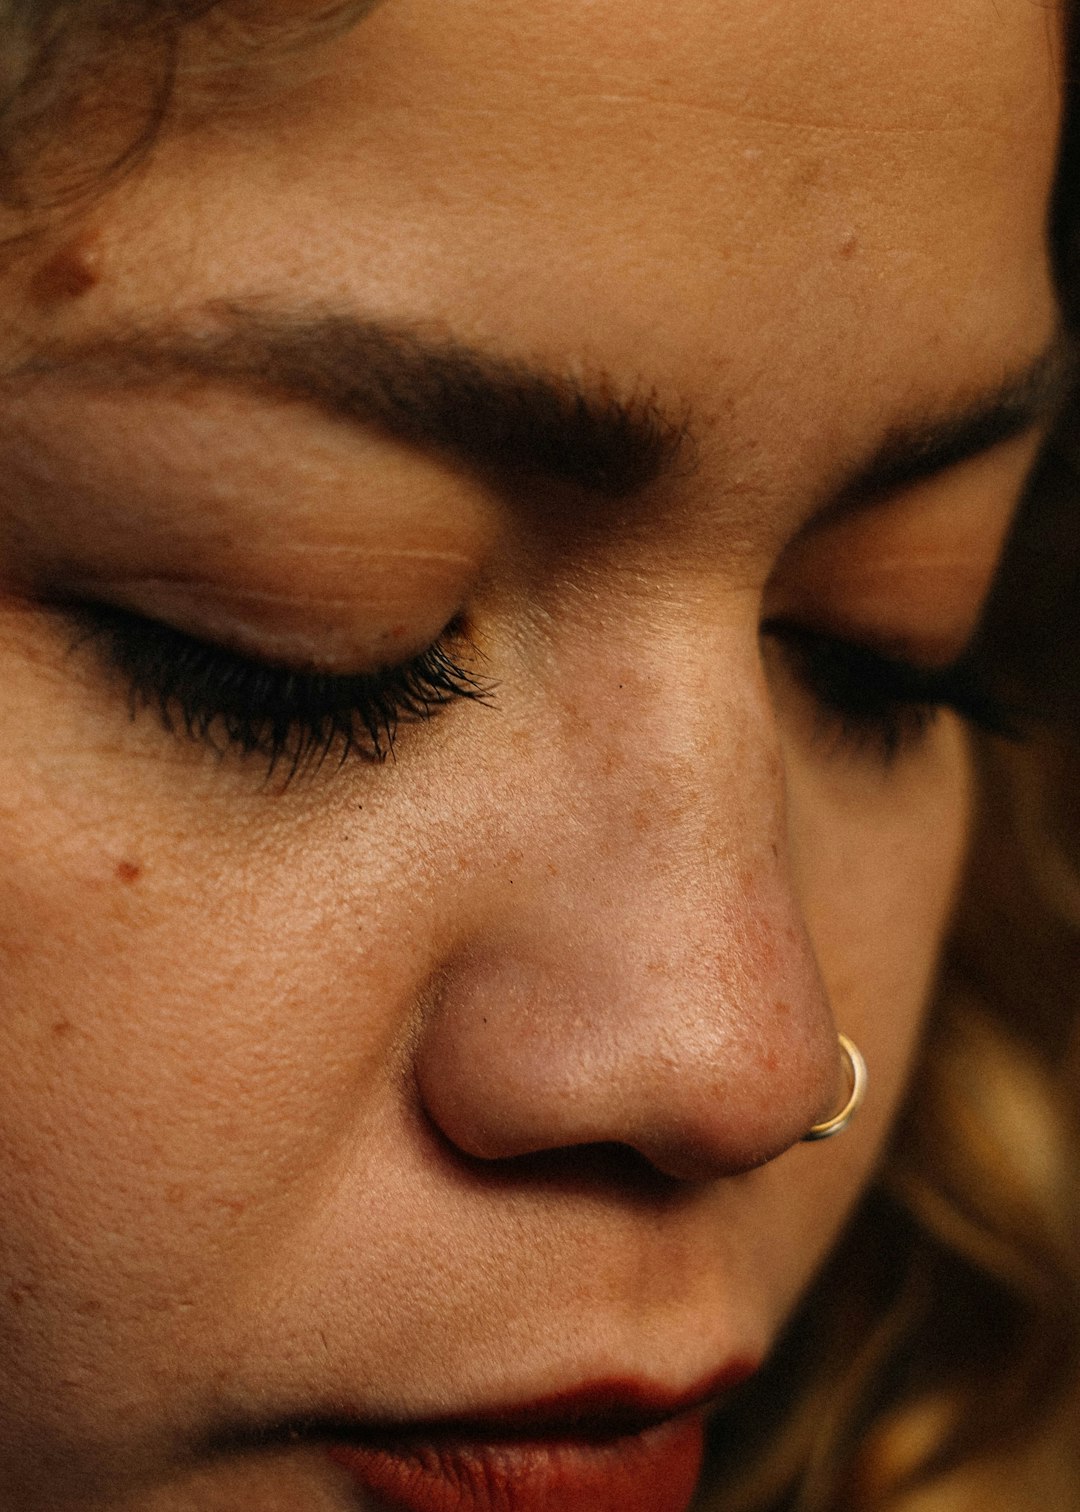 woman with silver nose piercing